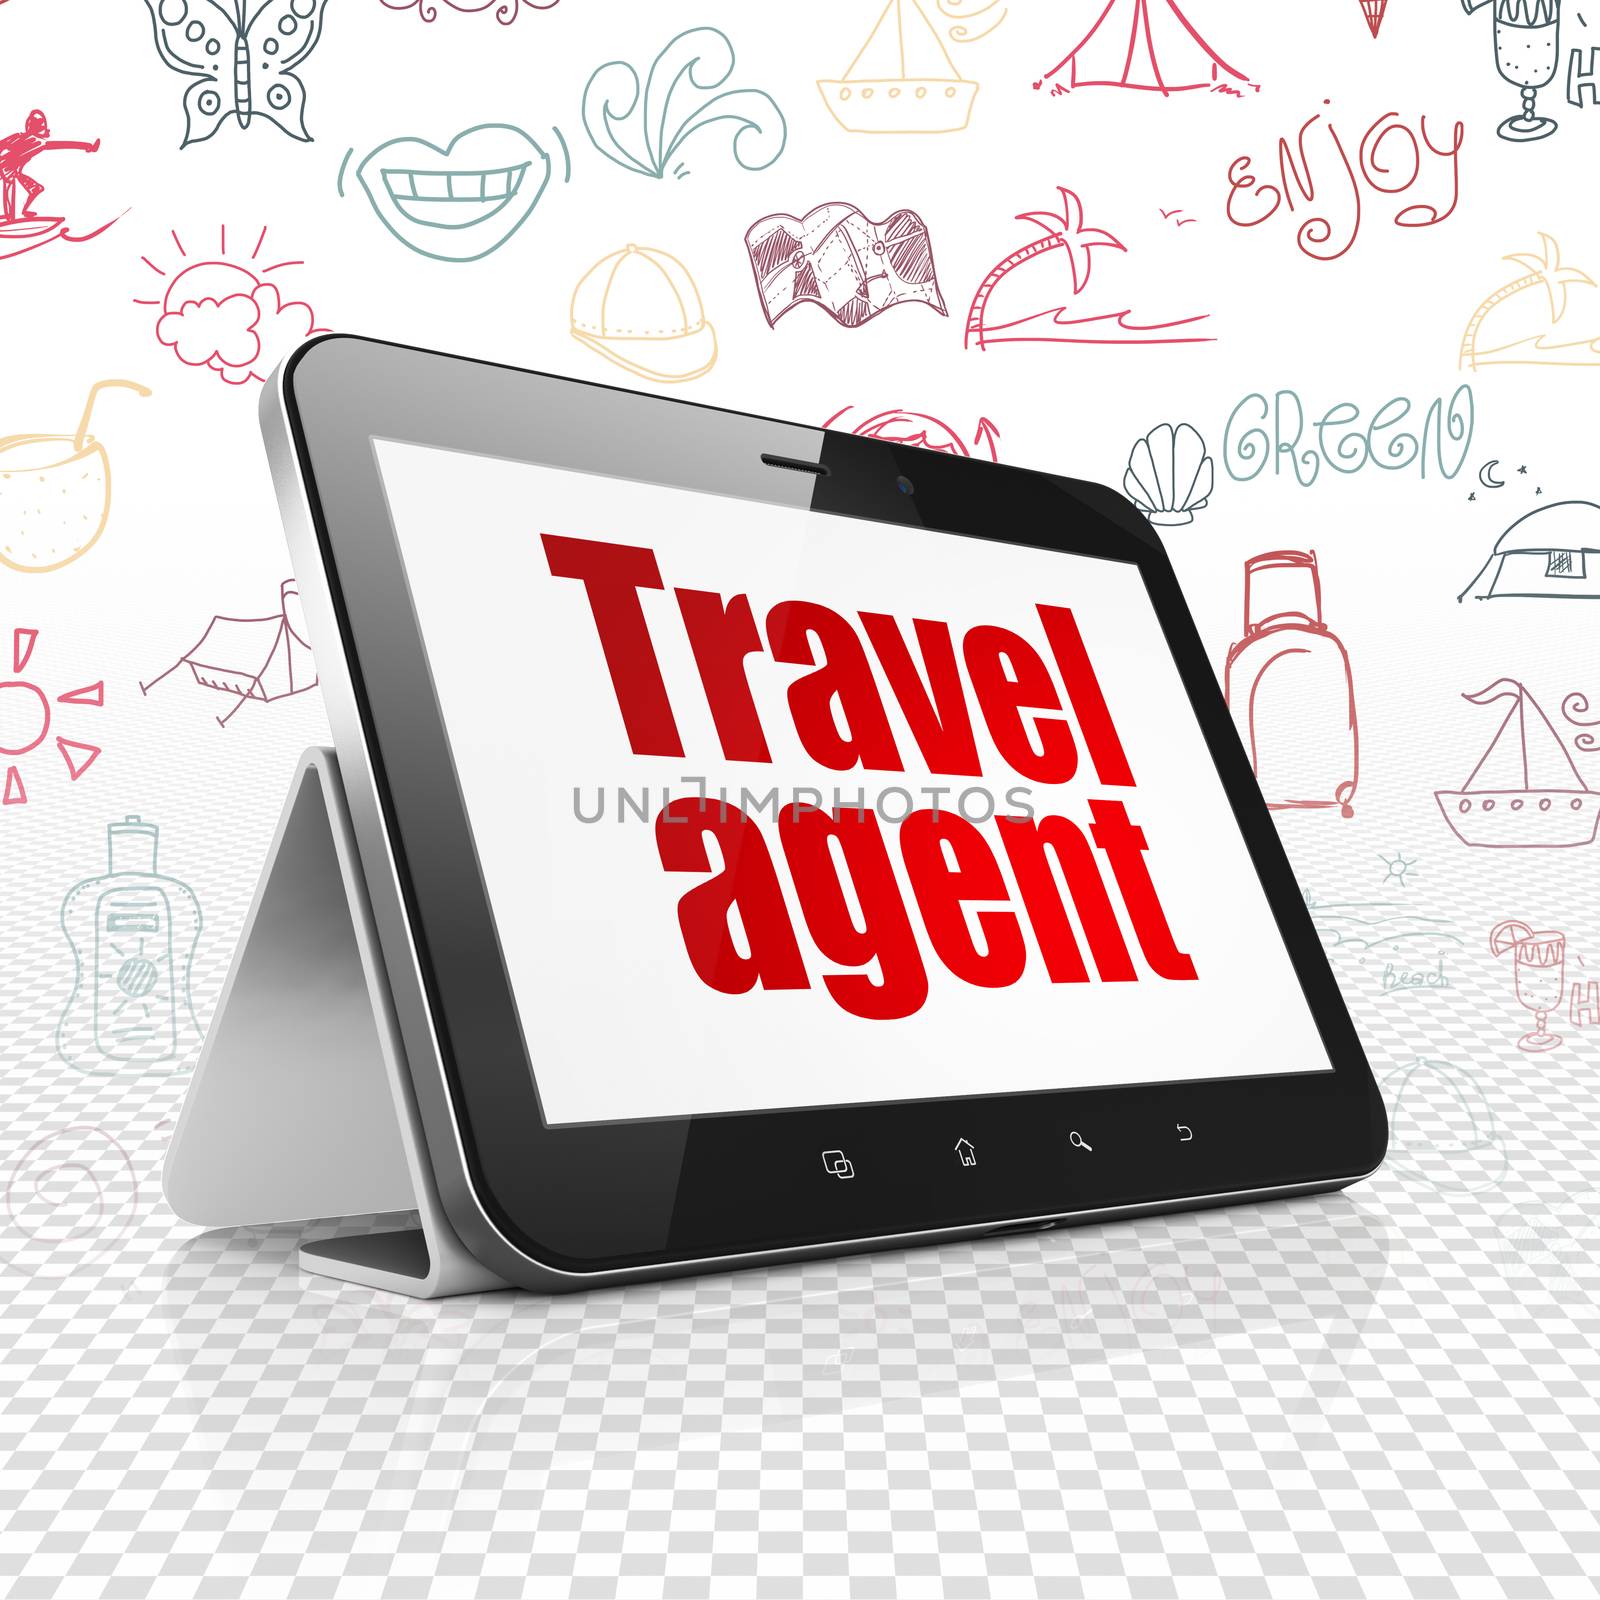 Vacation concept: Tablet Computer with  red text Travel Agent on display,  Hand Drawn Vacation Icons background, 3D rendering